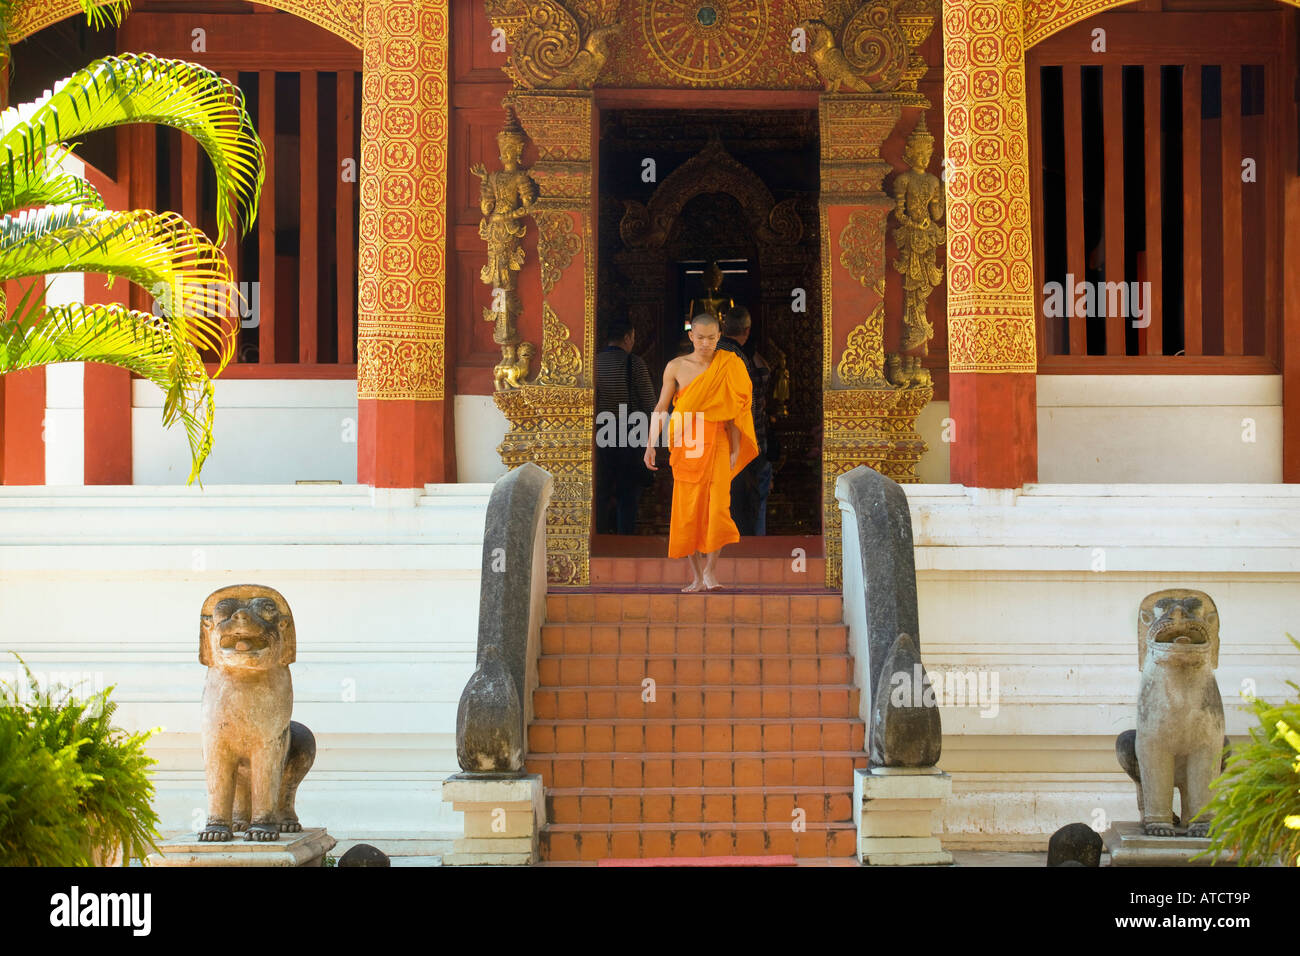 monk in the Wat Phra sing temple in Chiang Mai Stock Photo